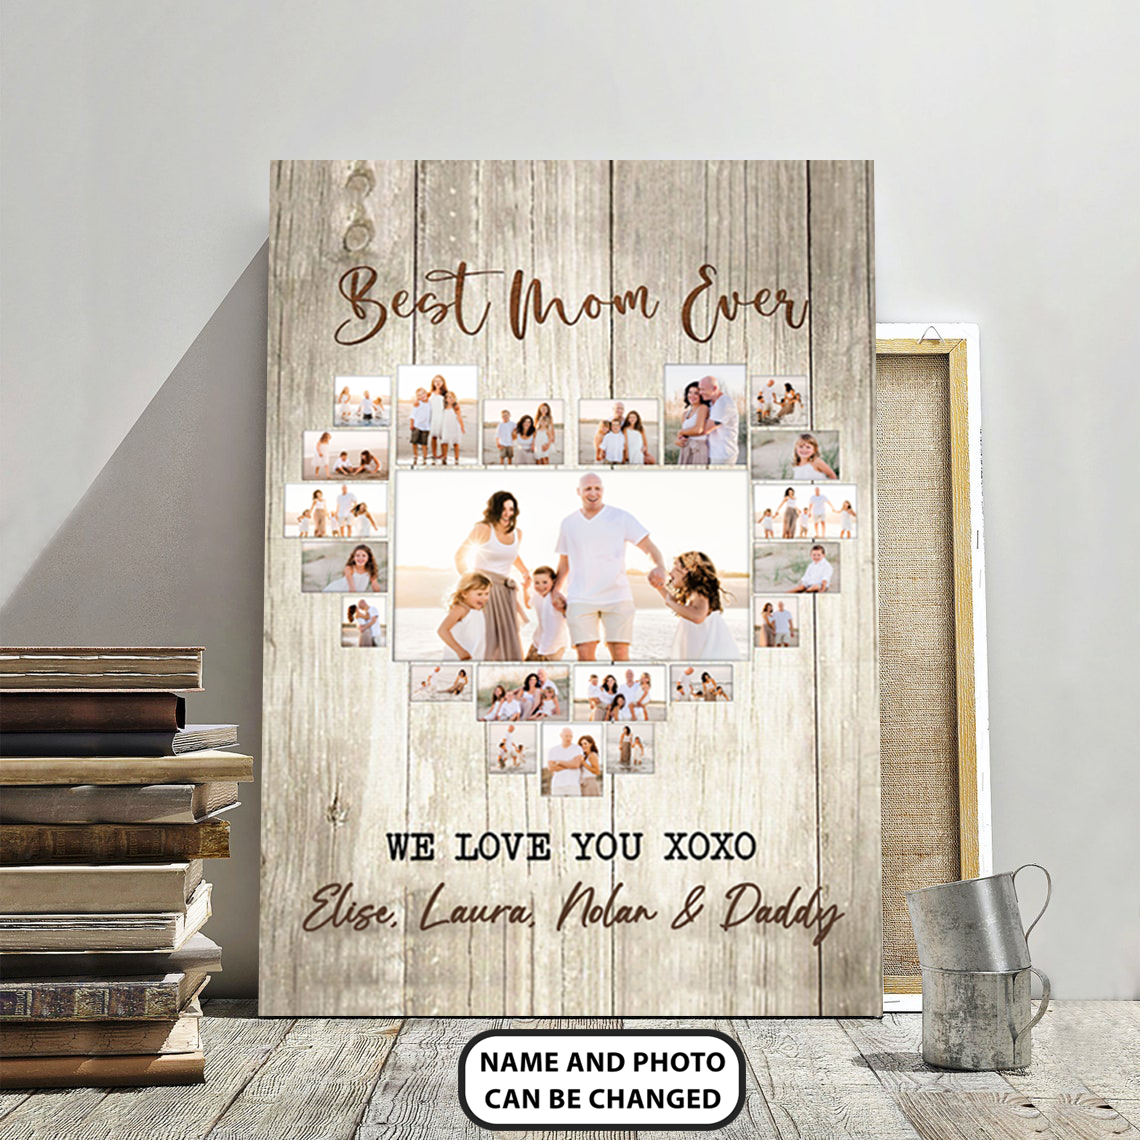 PresentsPrints, Best Mom ever, We love you xoxo, Personalized Canvas, Mother's Day Gift